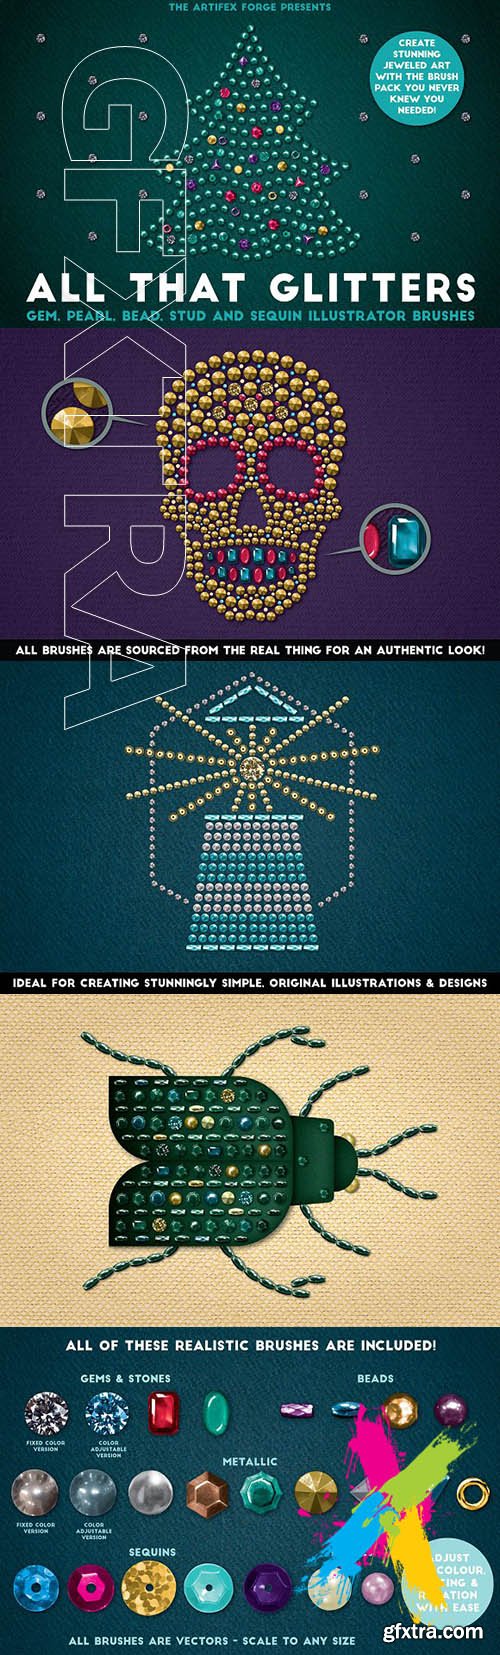 CreativeMarket - All That Glitters - Vector Brushes 1789318